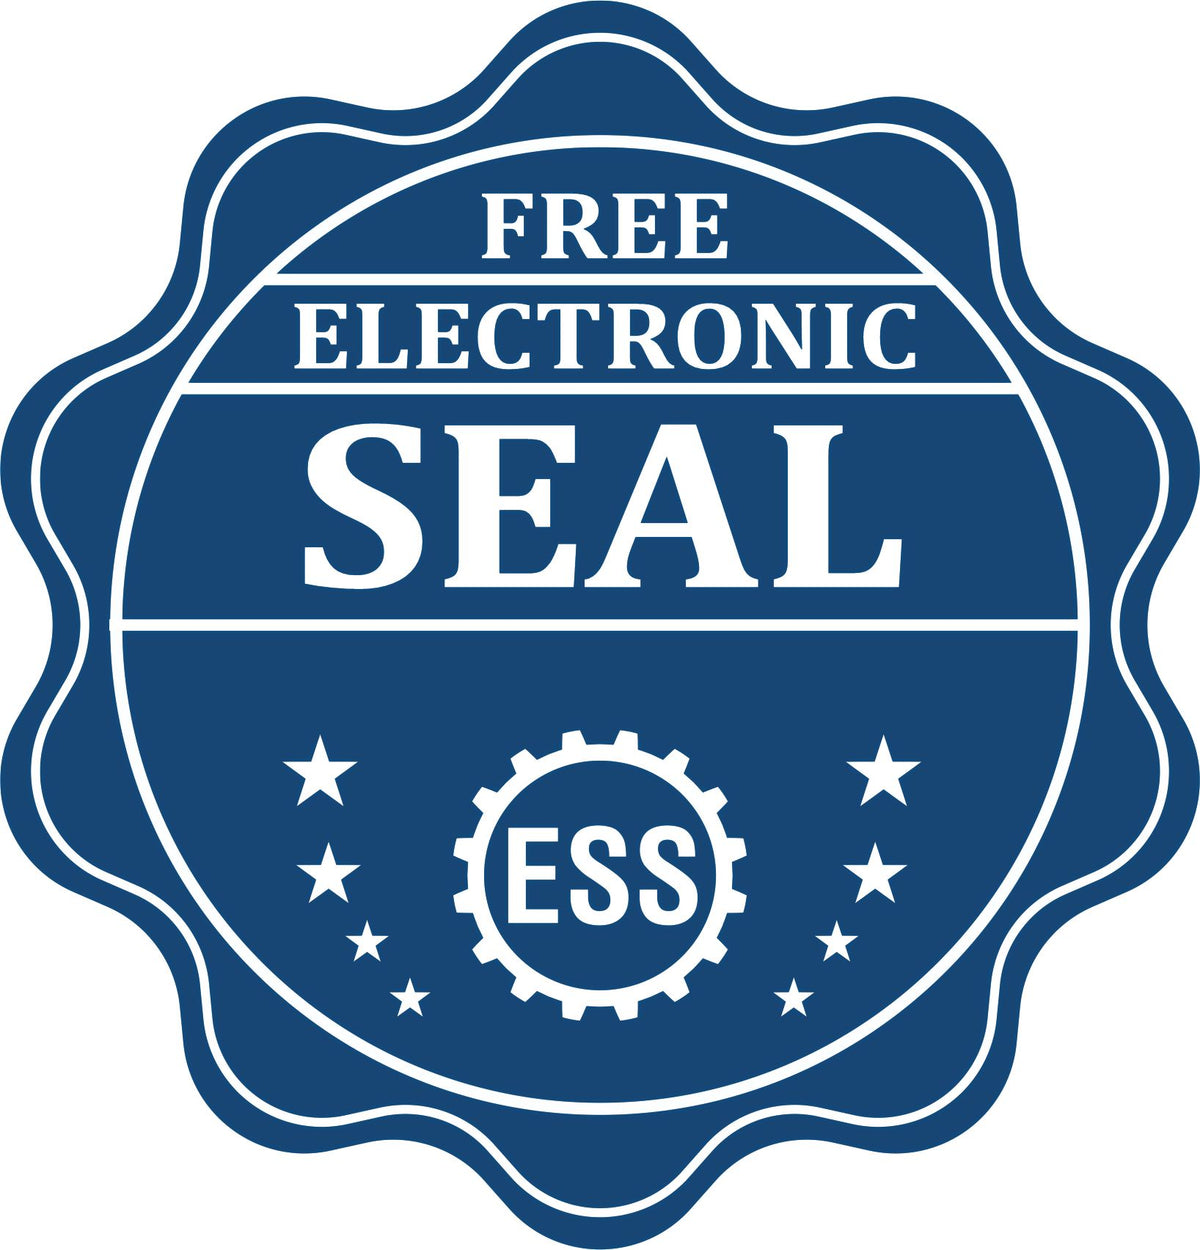 A badge showing a free electronic seal for the Soft Missouri Professional Engineer Seal with stars and the ESS gear on the emblem.